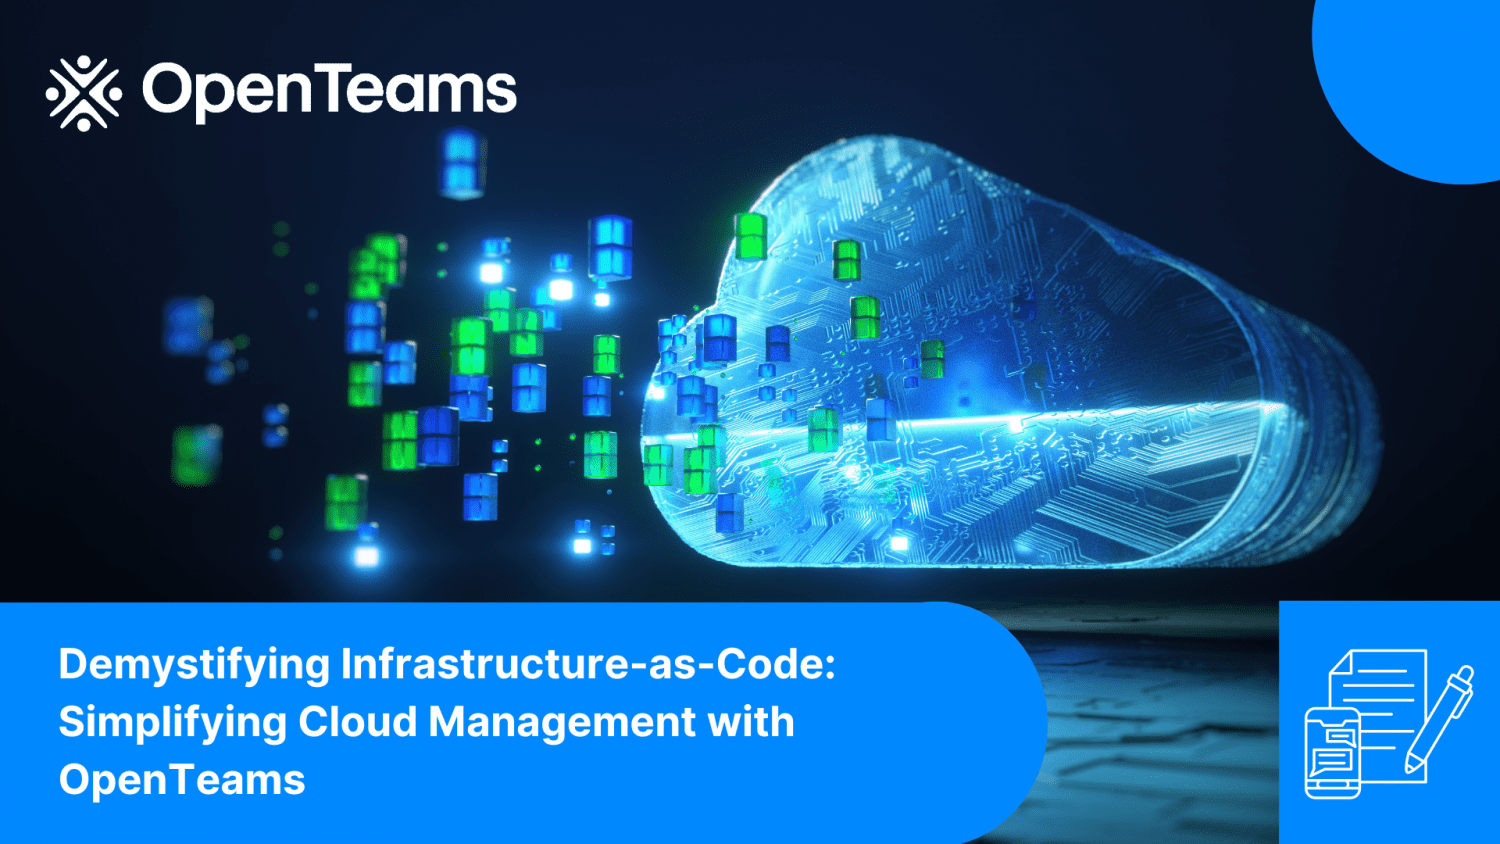 Demystifying Infrastructure-as-Code: Simplifying Cloud Management with OpenTeams